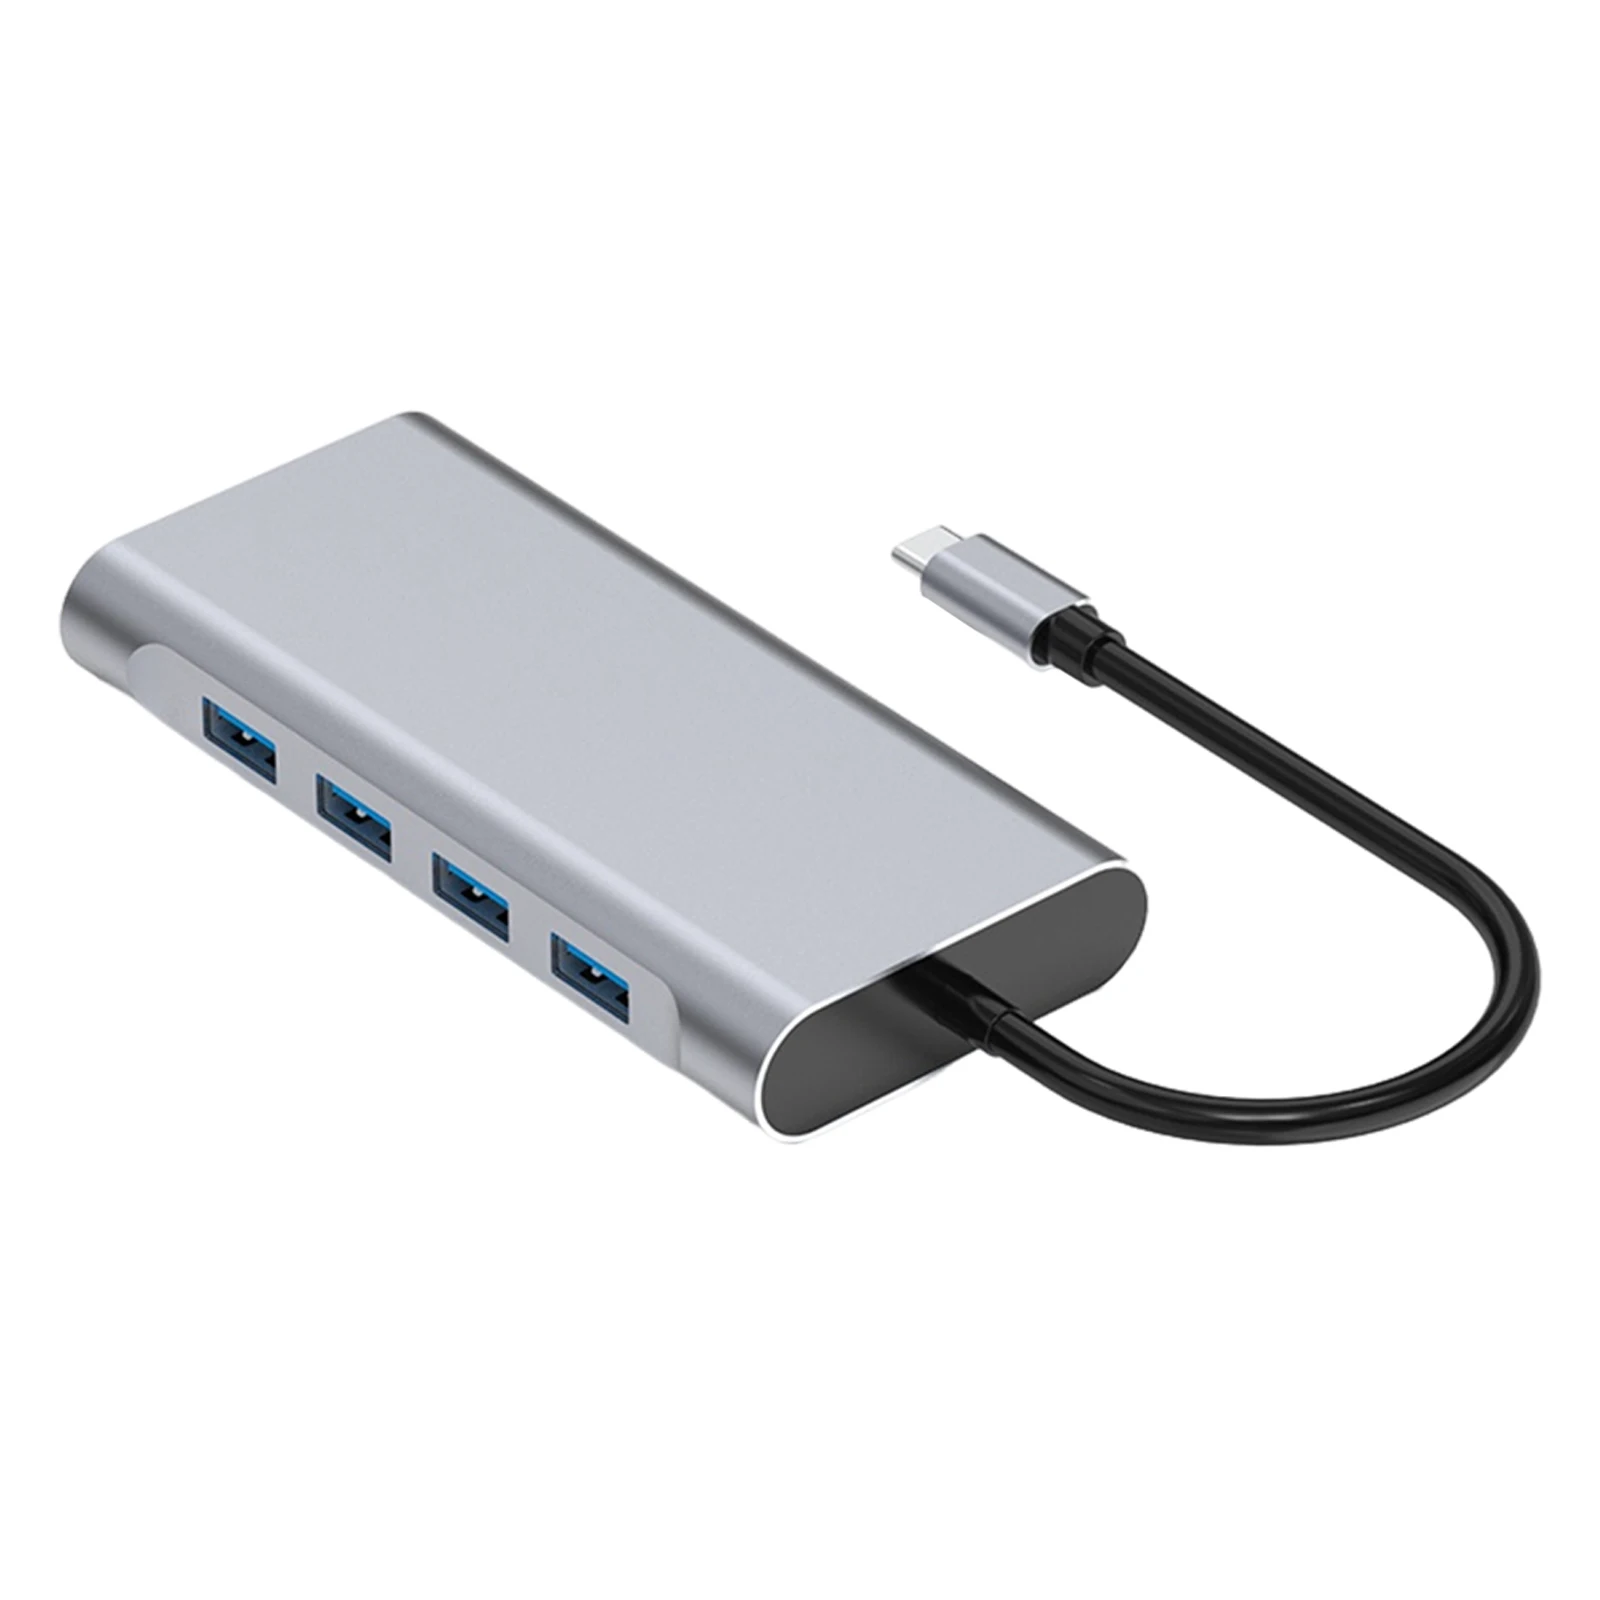 11 in 1 USB C Hub Multiport Adapter Portable Space 4 USB 3.0 Ports  for MacBook Pro Air XPS Type C Devices Mobile Phones